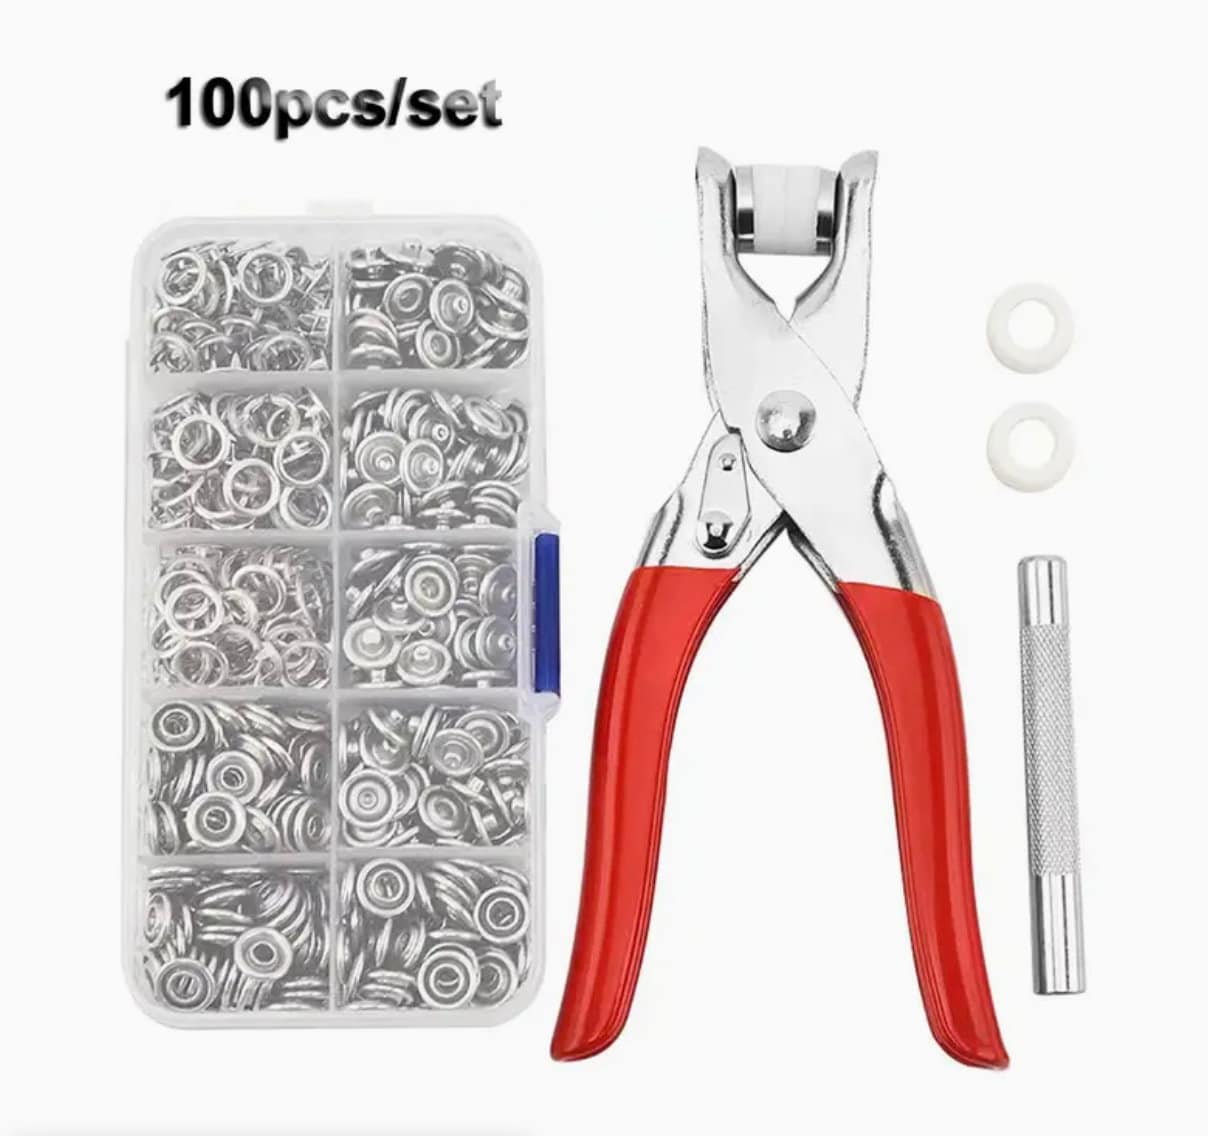 Plastic Snaps Buttons Fasteners With Plier Tool T3 No-sew KAM Snap Starter  Kit 15 Colors Poppers DIY Studs With Box for Woollen Wear -  UK